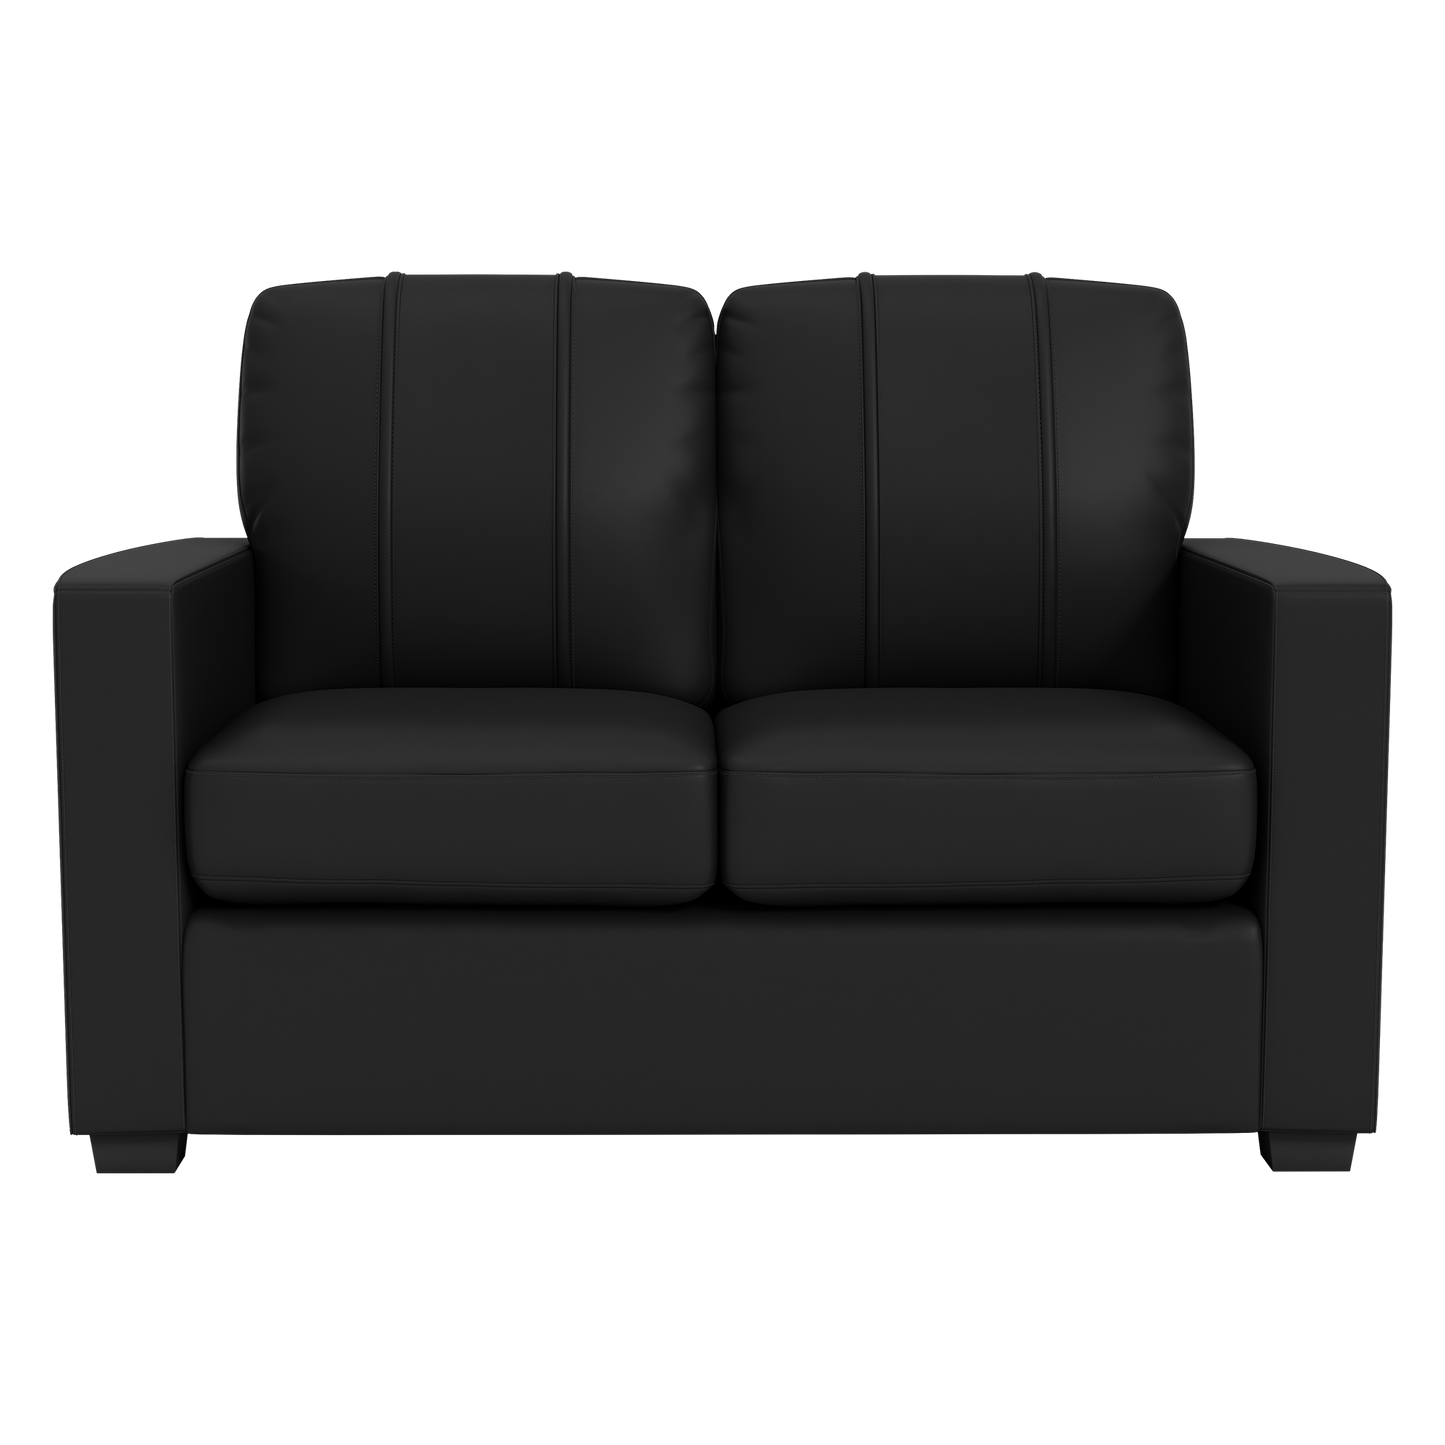 Silver Loveseat with Youngstown State Secondary Logo